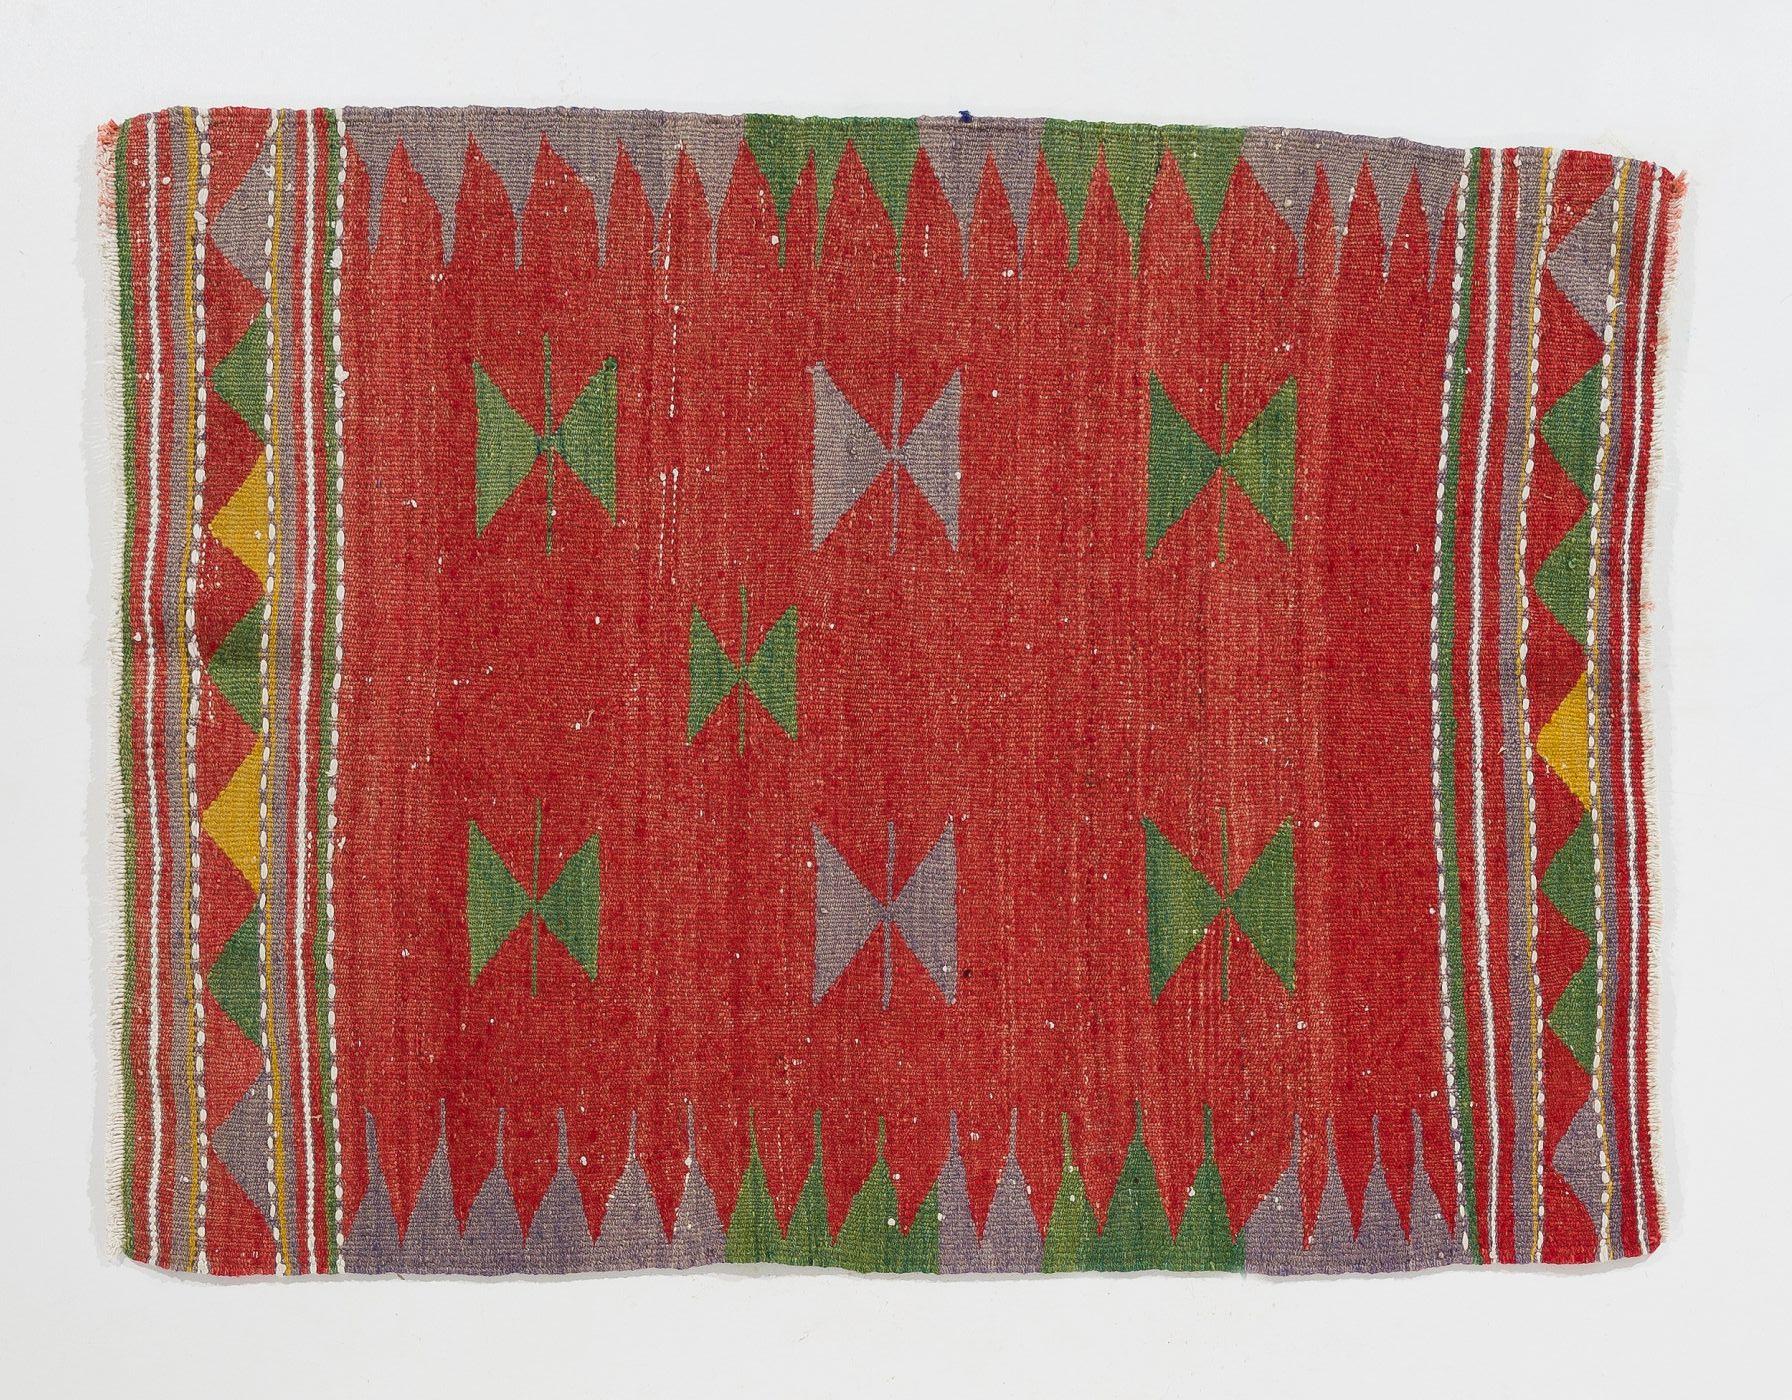 Hand-Woven 3.2x4.2 ft Vintage Swedish Kilim. Flat-Weave Rug in Red, Green, Yellow & Gray